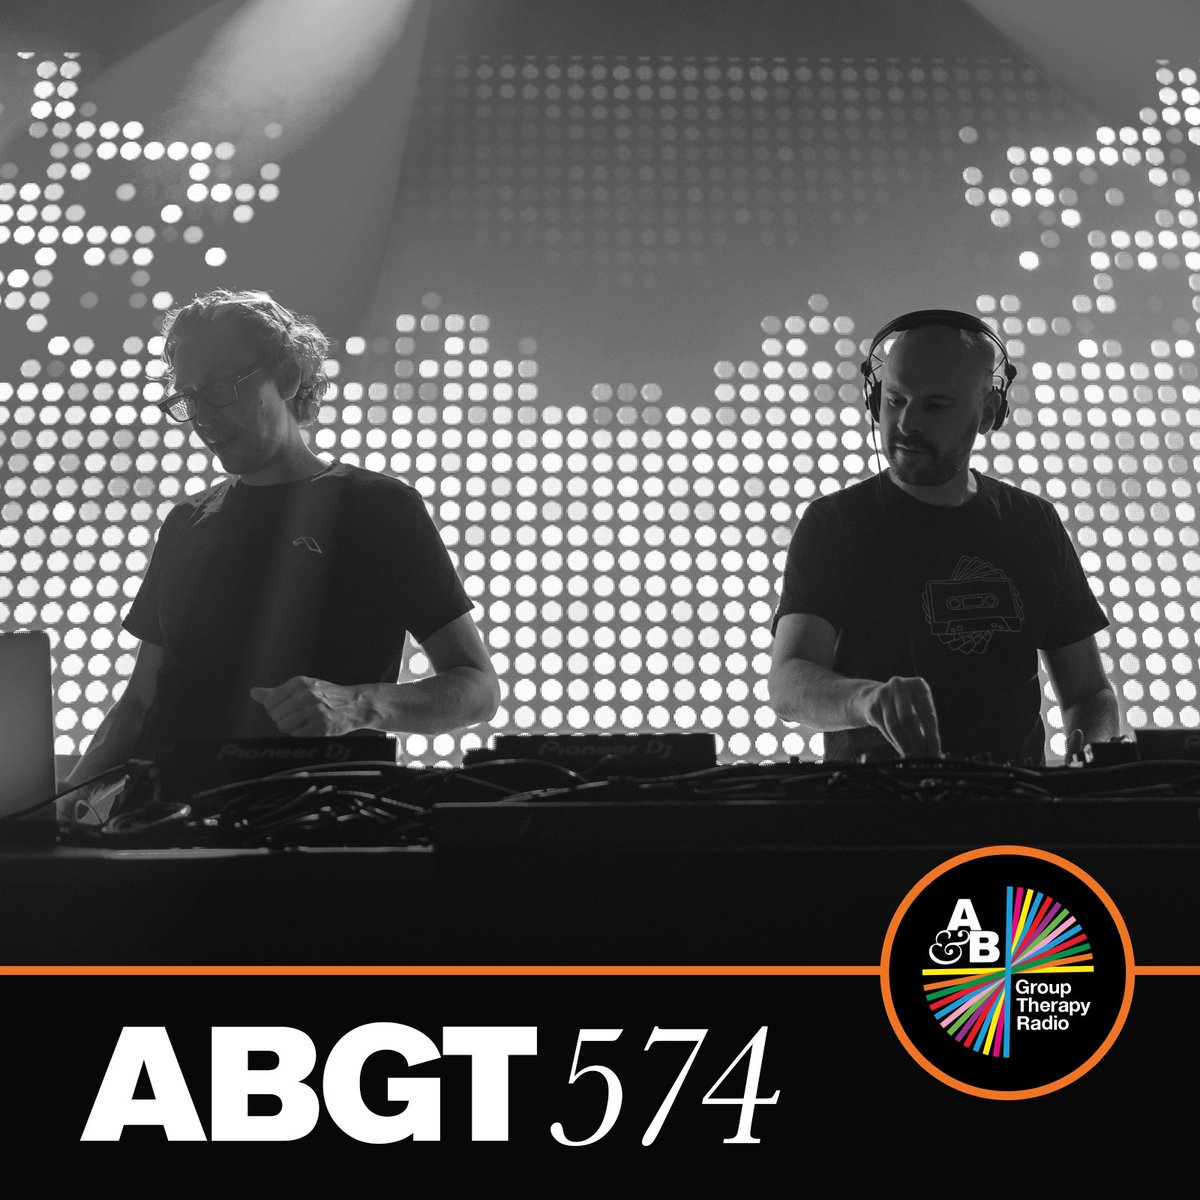 Brand new @GabrielNDresden, @WeAreKasablanca & @Lane8music and @GenixDJ - all on tonight's episode of @abgrouptherapy. Tune in from 7pm BST via our YouTube or Twitch. See you then!